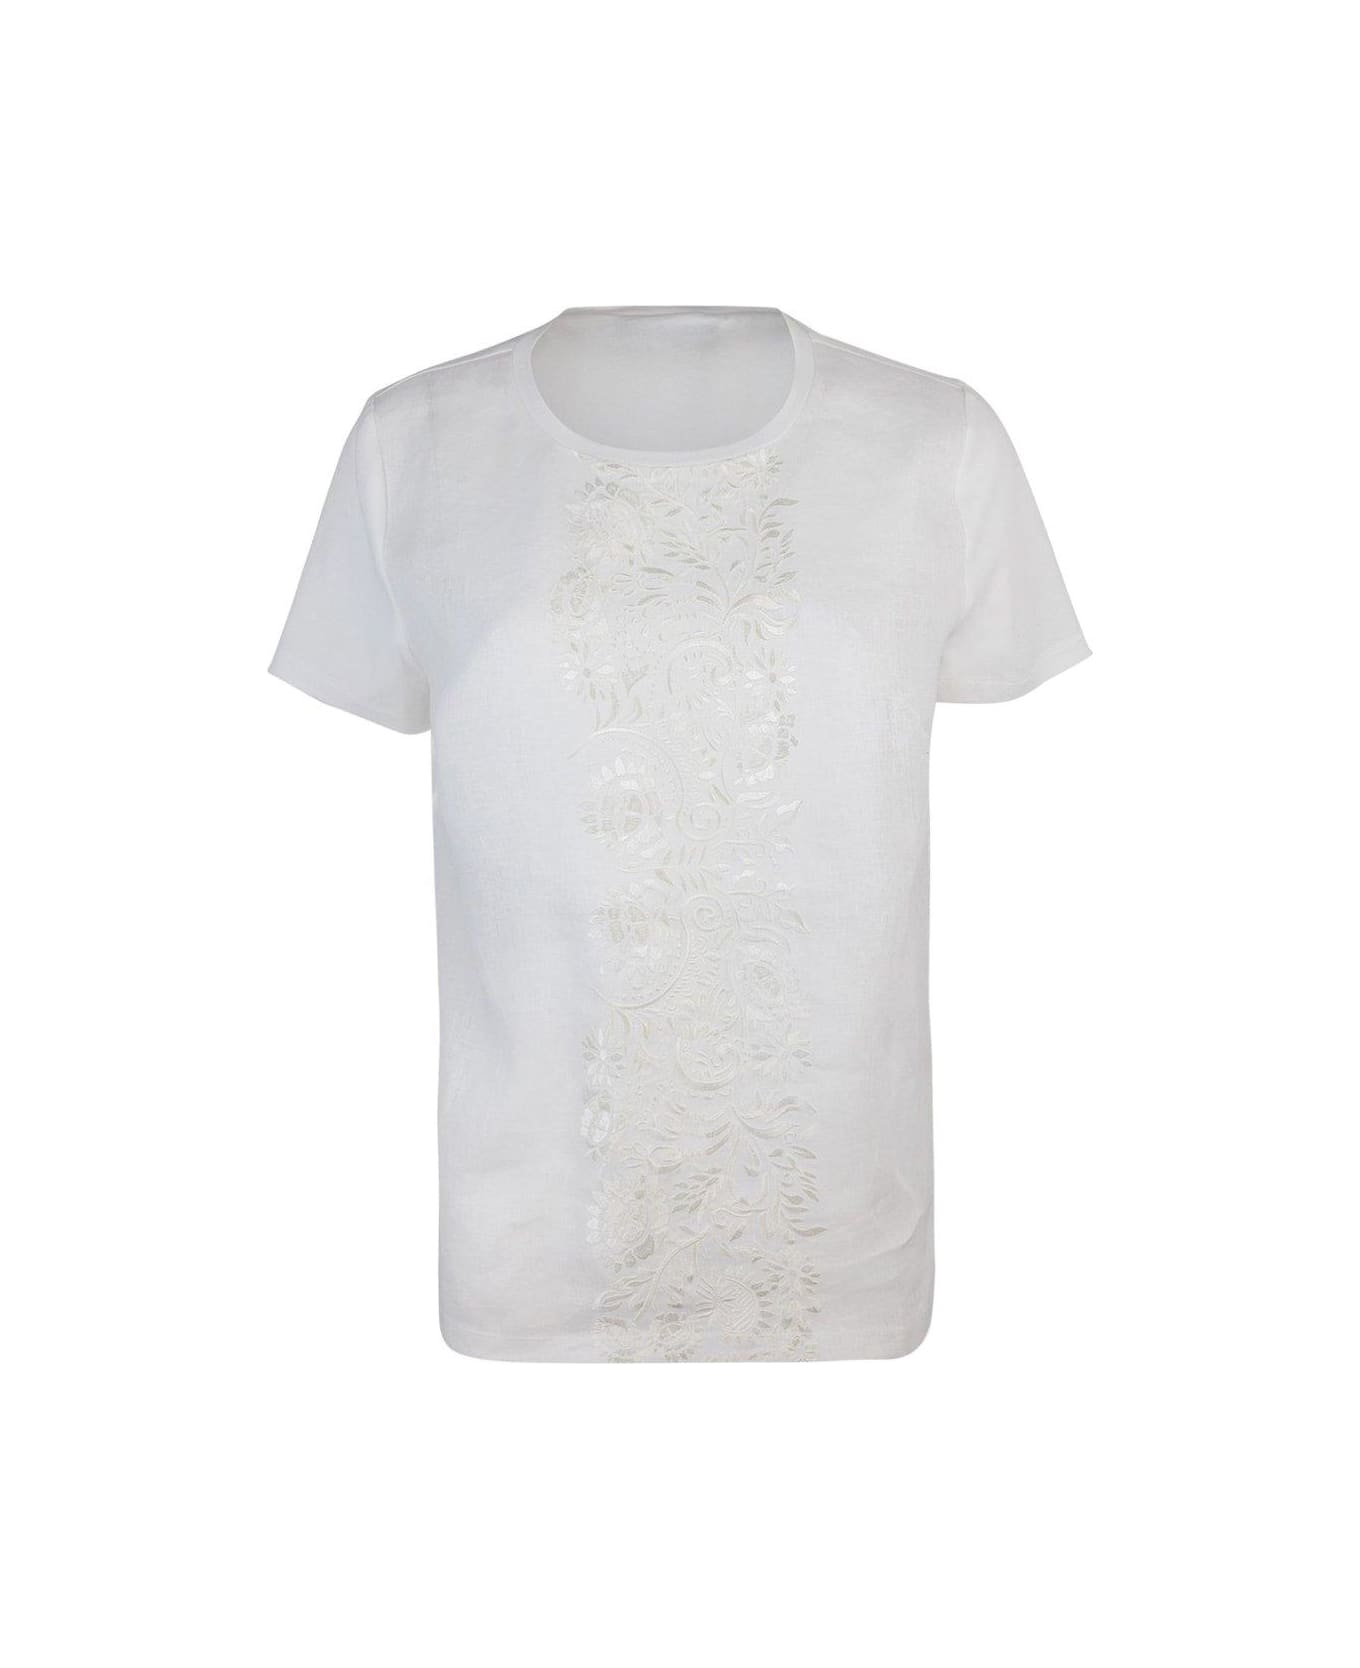 Weekend Max Mara Floral Embroidered Crewneck T-shirt - WHITE